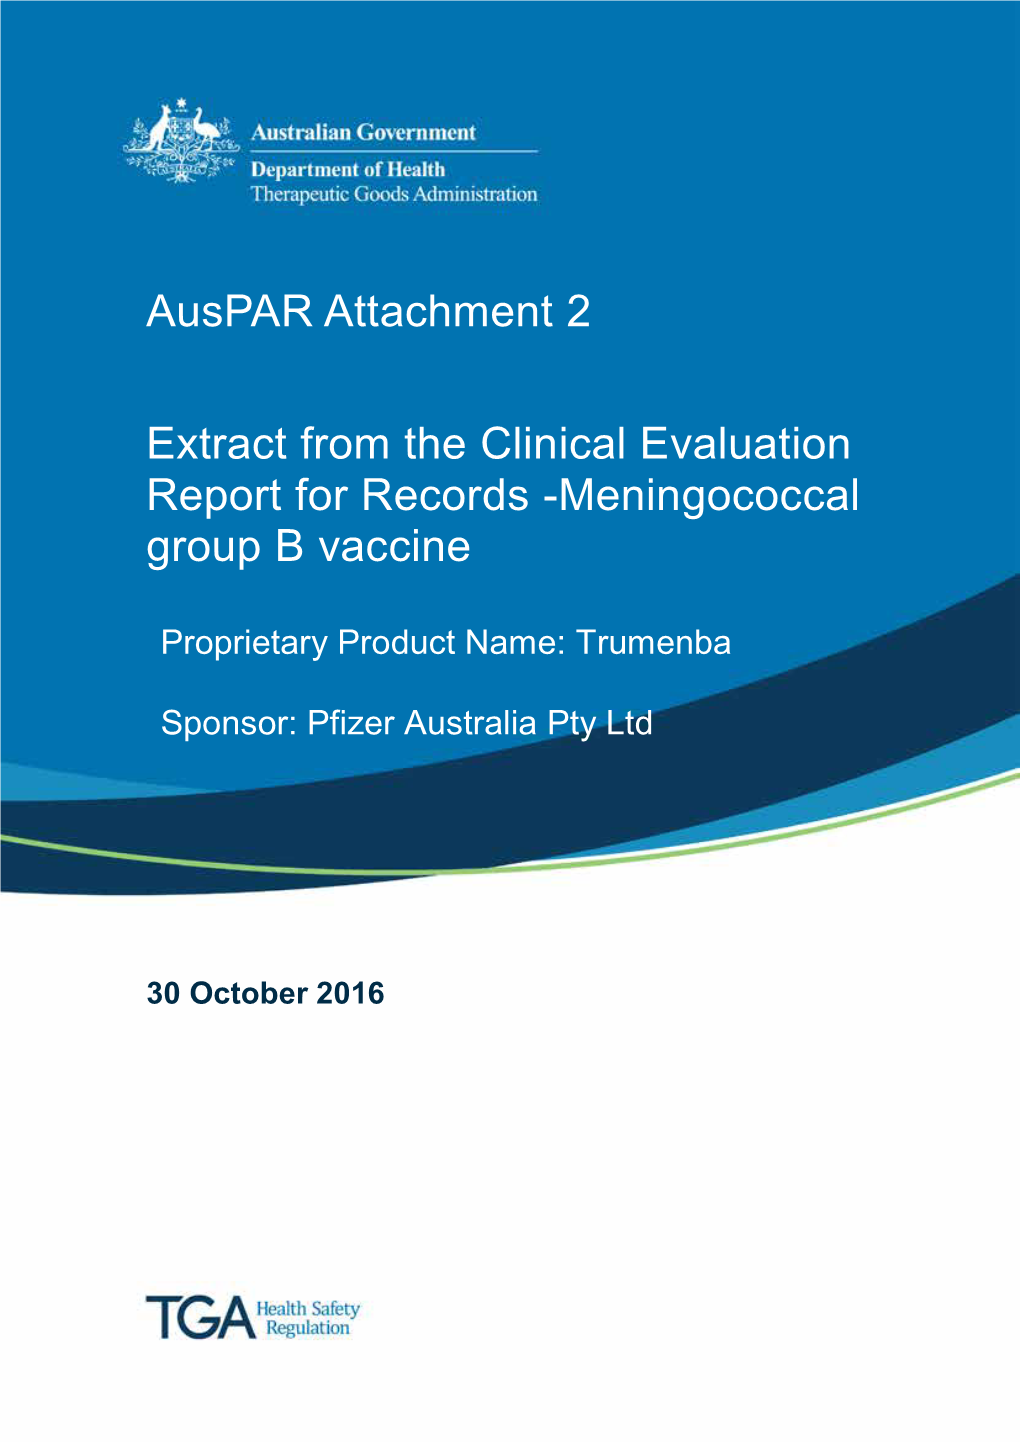 Extract from Clinical Evaluation: Meningococcal Group B Vaccine